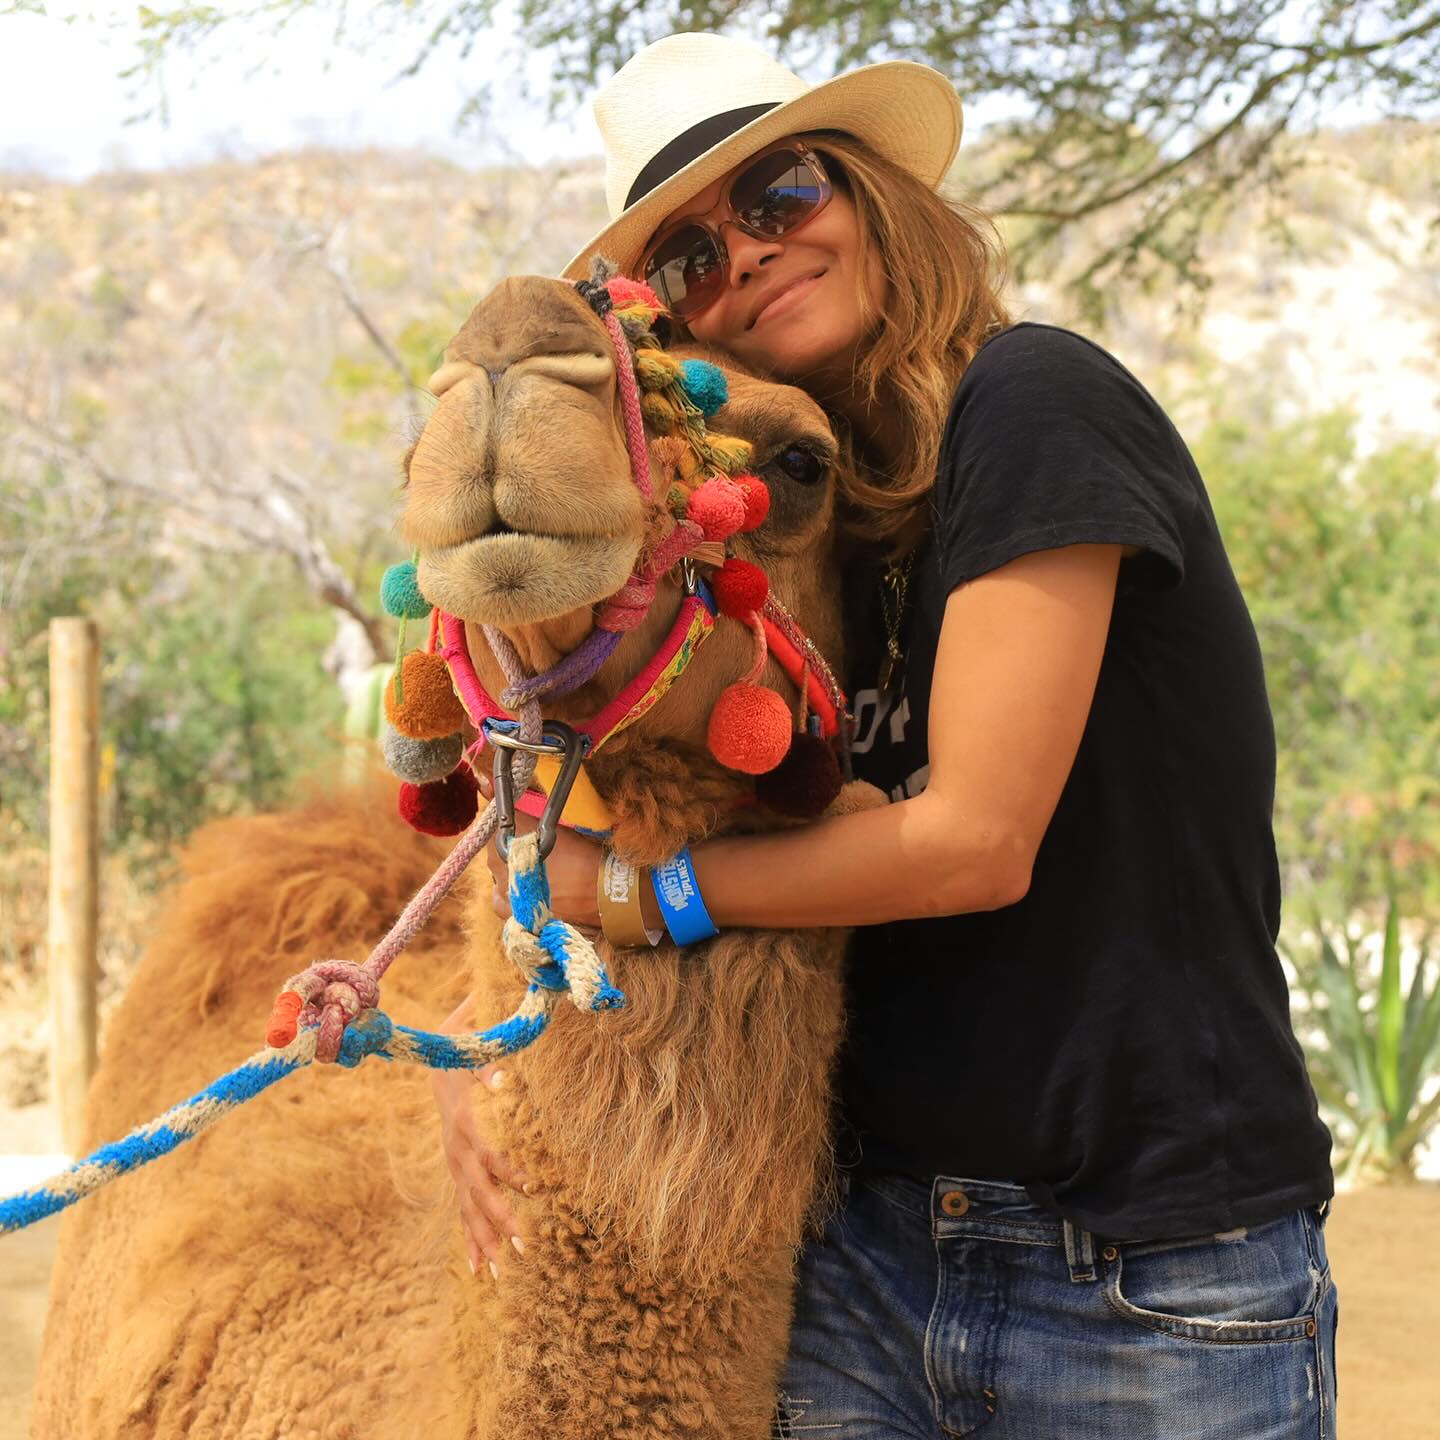 Halle shared sweet photos with a camel in Mexico